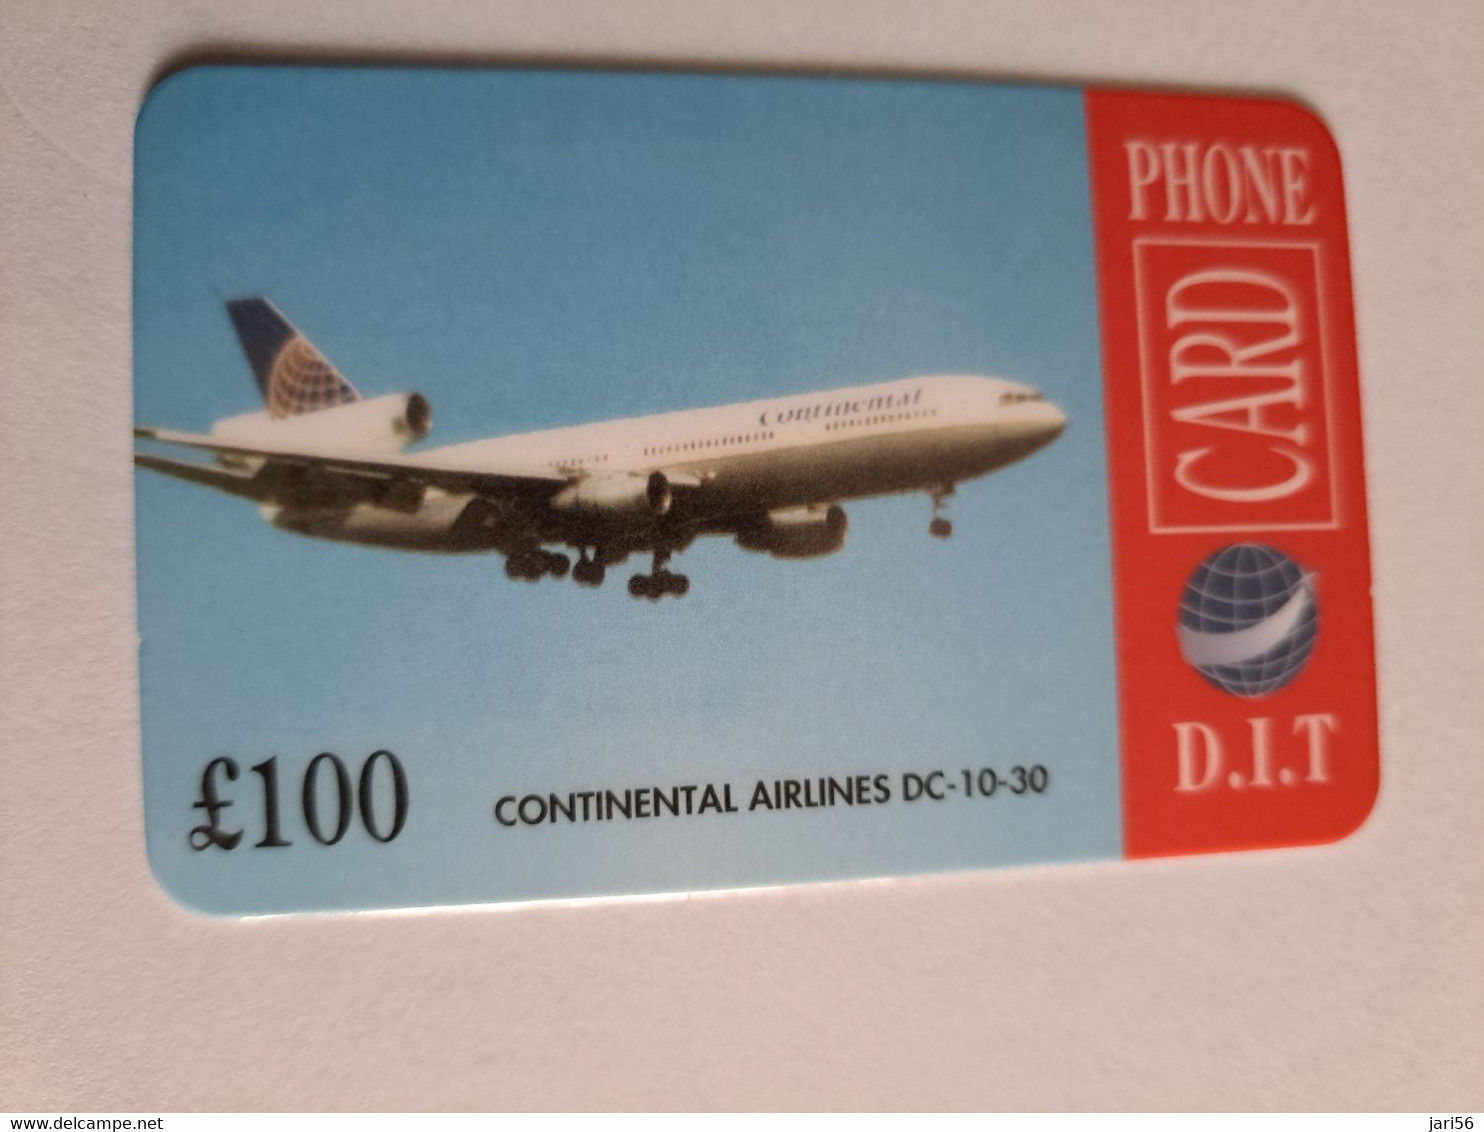 GREAT BRITAIN   100 POUND   / CONTINENTAL AIRLINES DC 10-30   DIT PHONECARD    PREPAID CARD      **12903** - [10] Colecciones